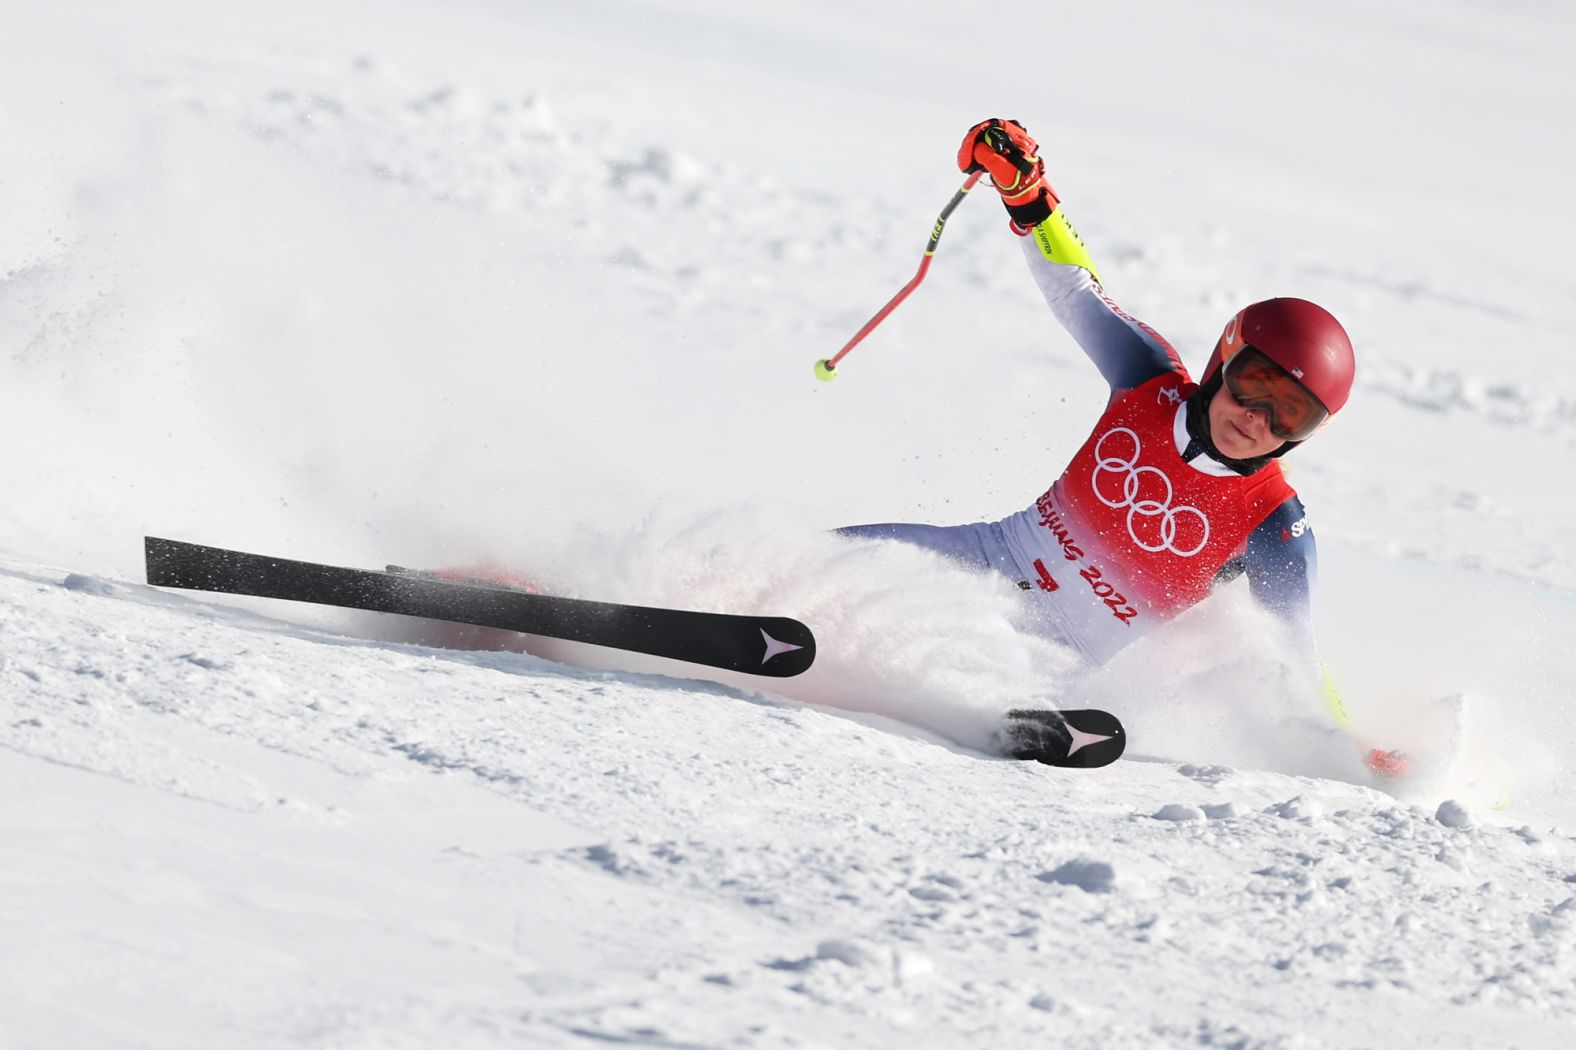 American skier Mikaela Shiffrin <a href="index.php?page=&url=https%3A%2F%2Fwww.cnn.com%2Fworld%2Flive-news%2Fbeijing-winter-olympics-02-07-22-spt%2Fh_c67e815b4abe2381f4ae0467622fa538" target="_blank">falls during the giant slalom</a> on February 7. Shiffrin won gold in the event four years ago in South Korea.